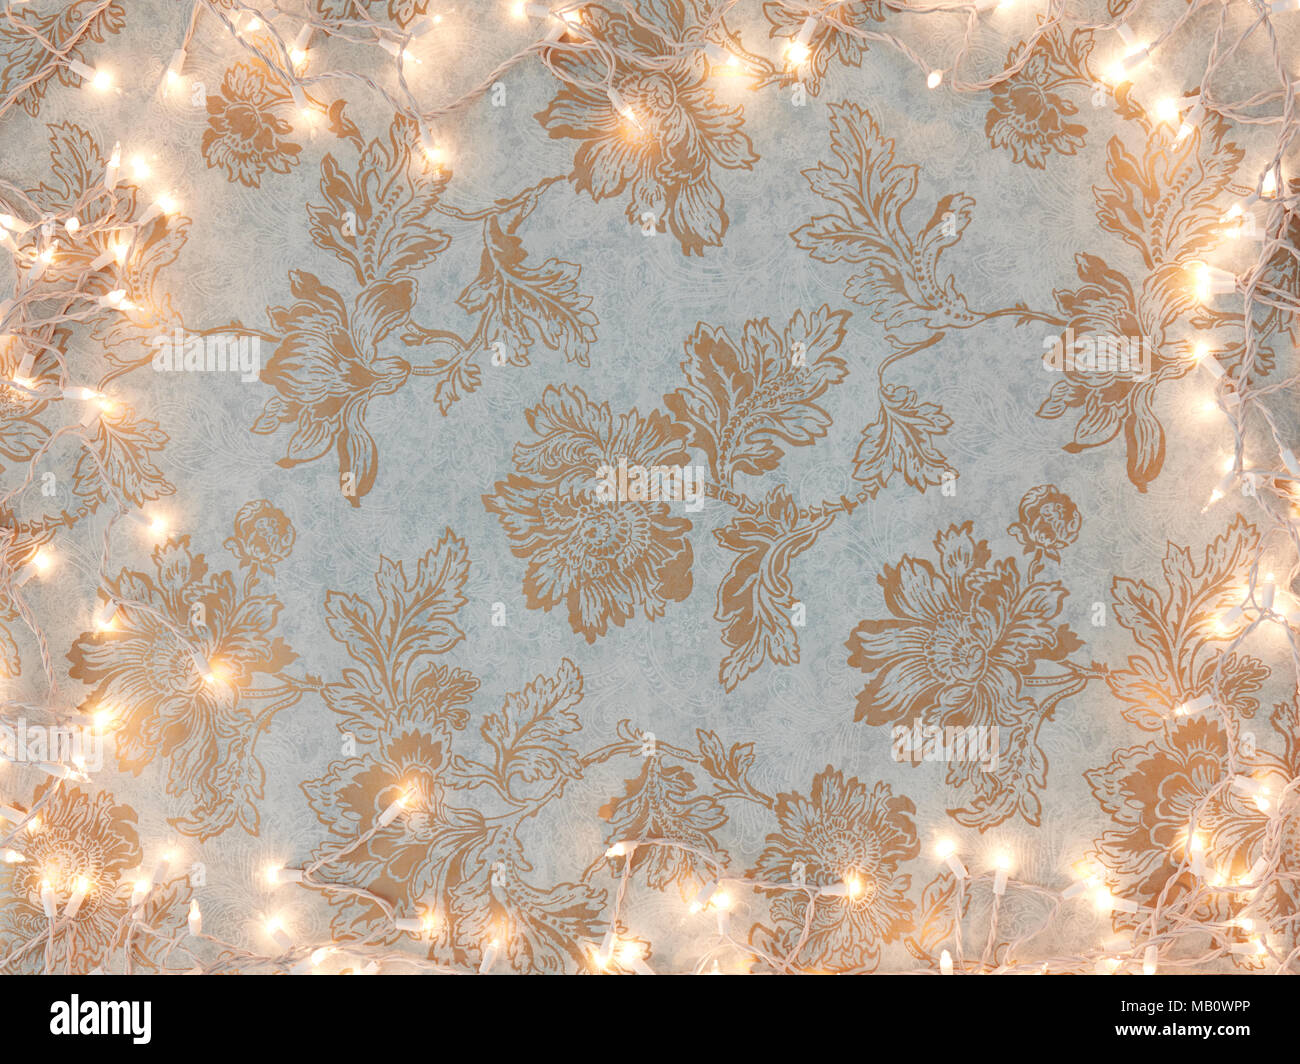 Vintage gold floral wallpaper background with holiday white lights frame. Stock Photo